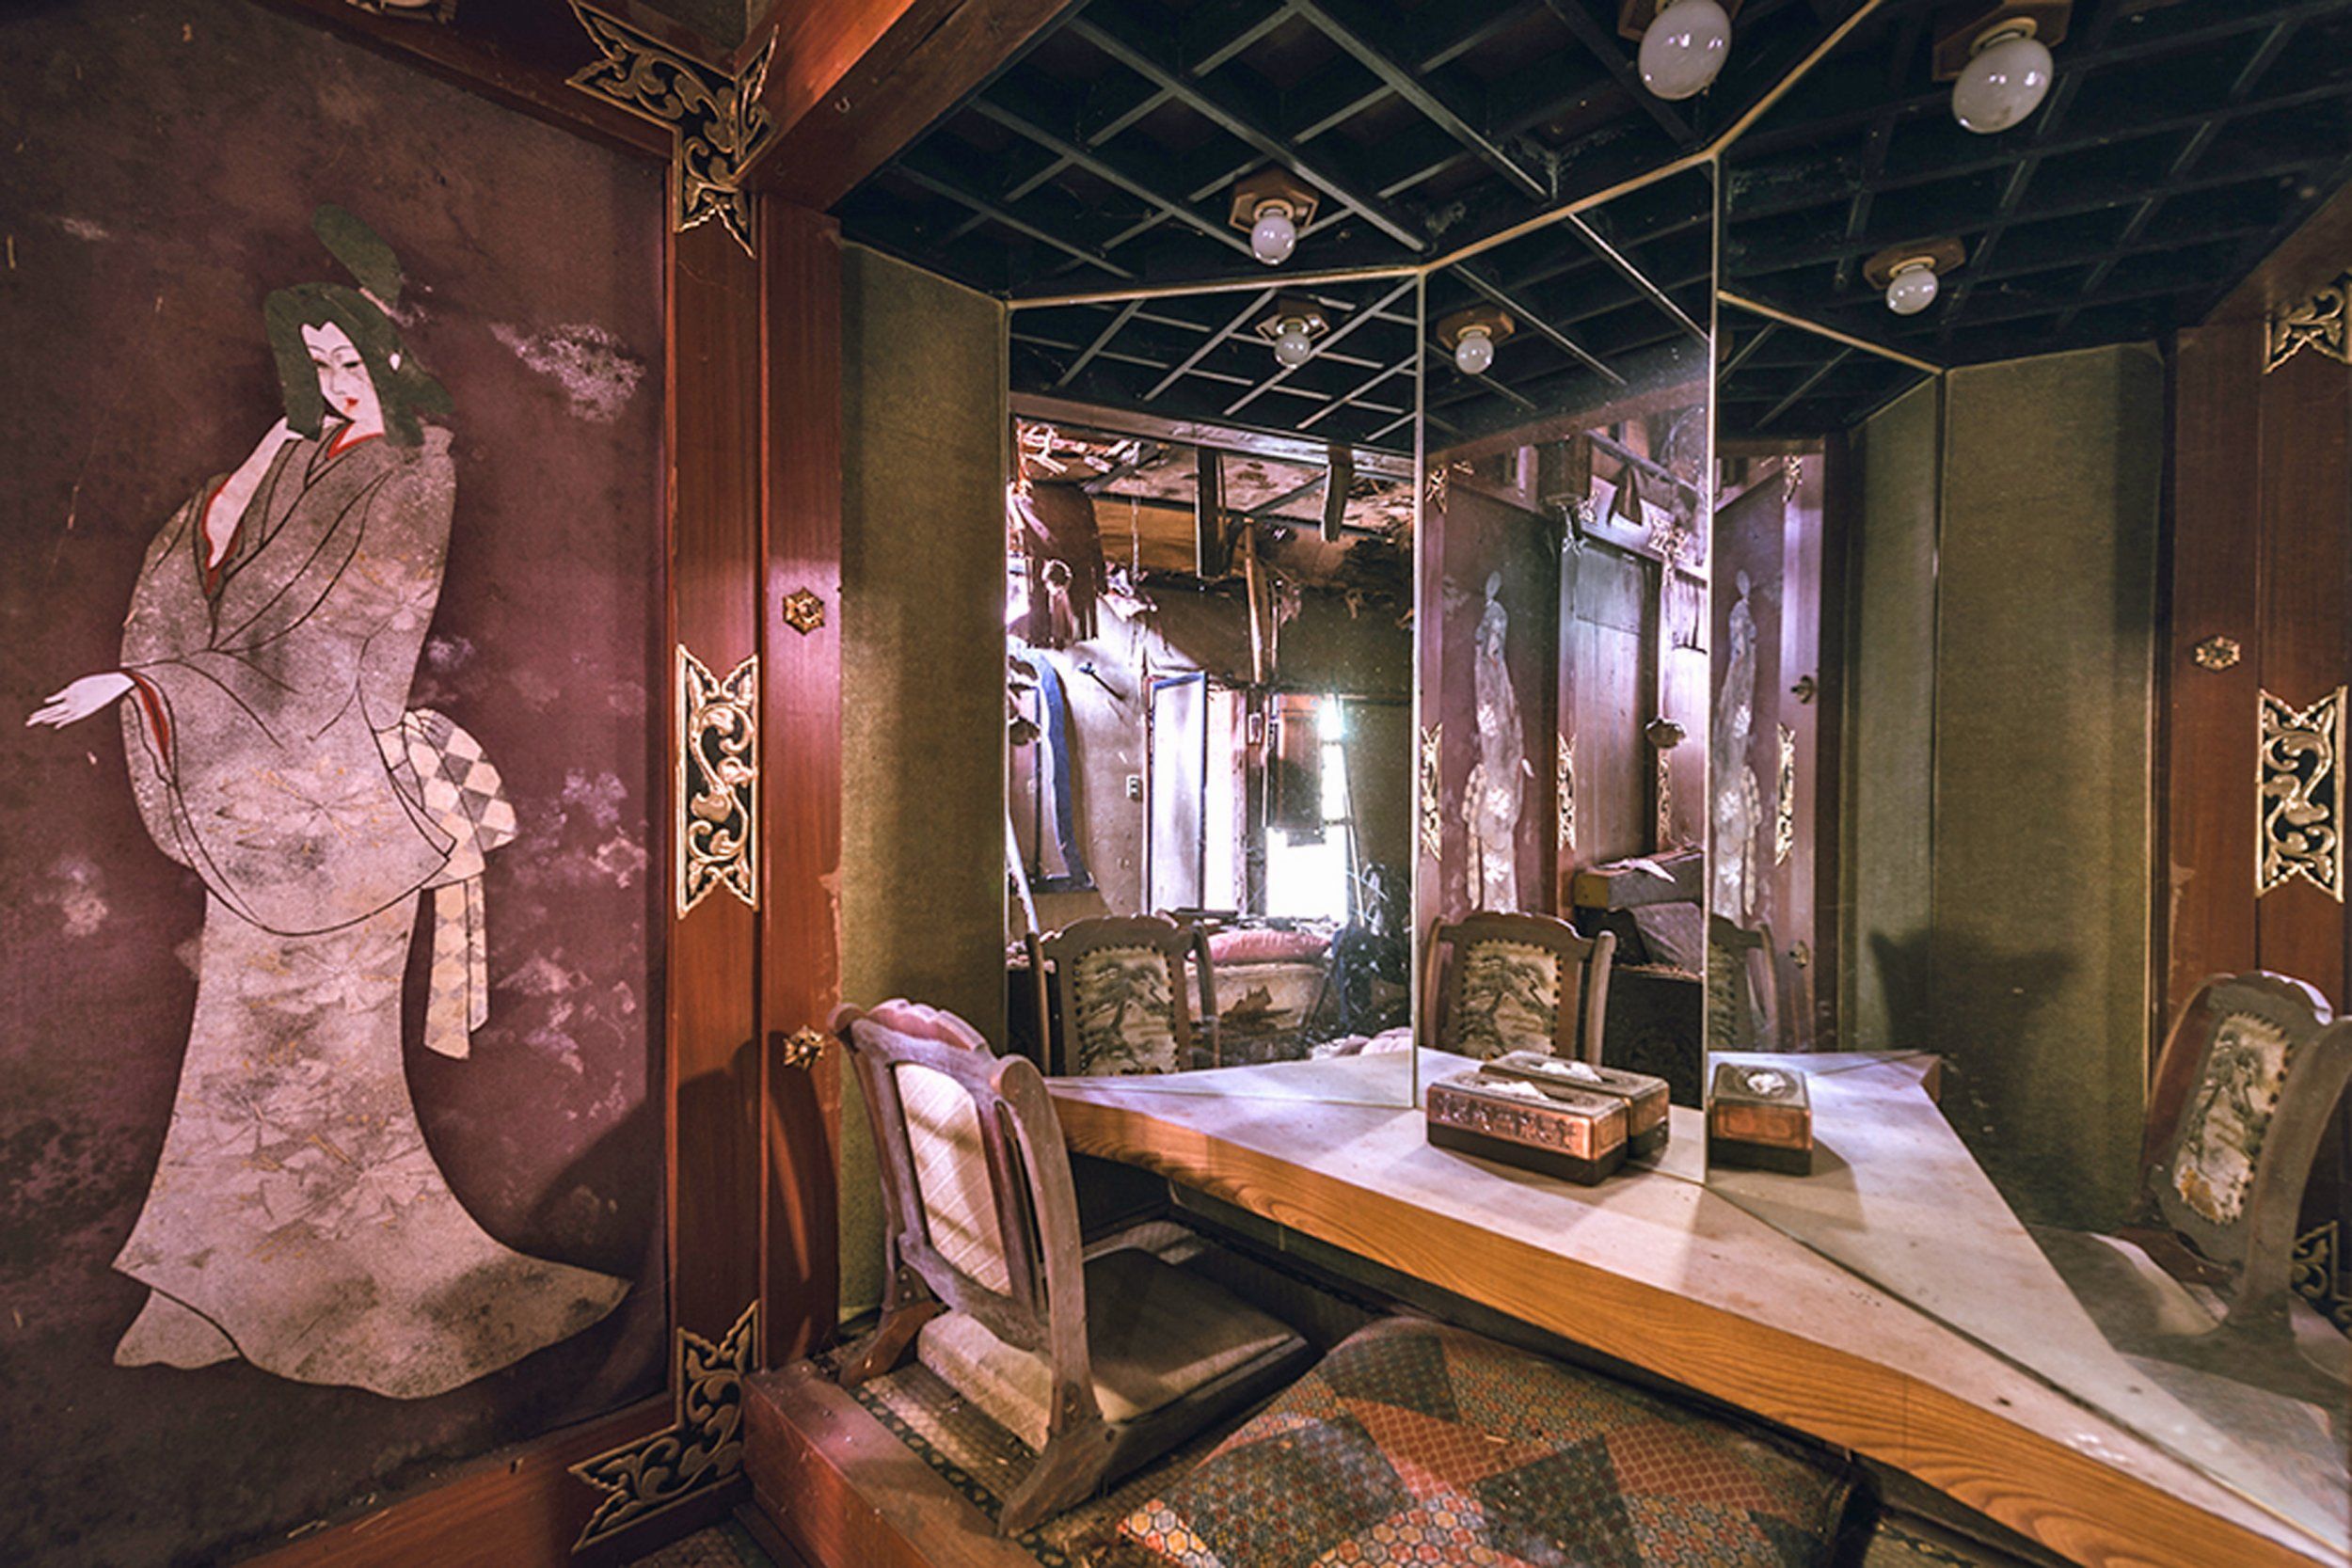 There are ten themed rooms in the hotel, and many had traditional Japanese touches. Pictured, a decaying wall painting of a woman and embroidered chairs.